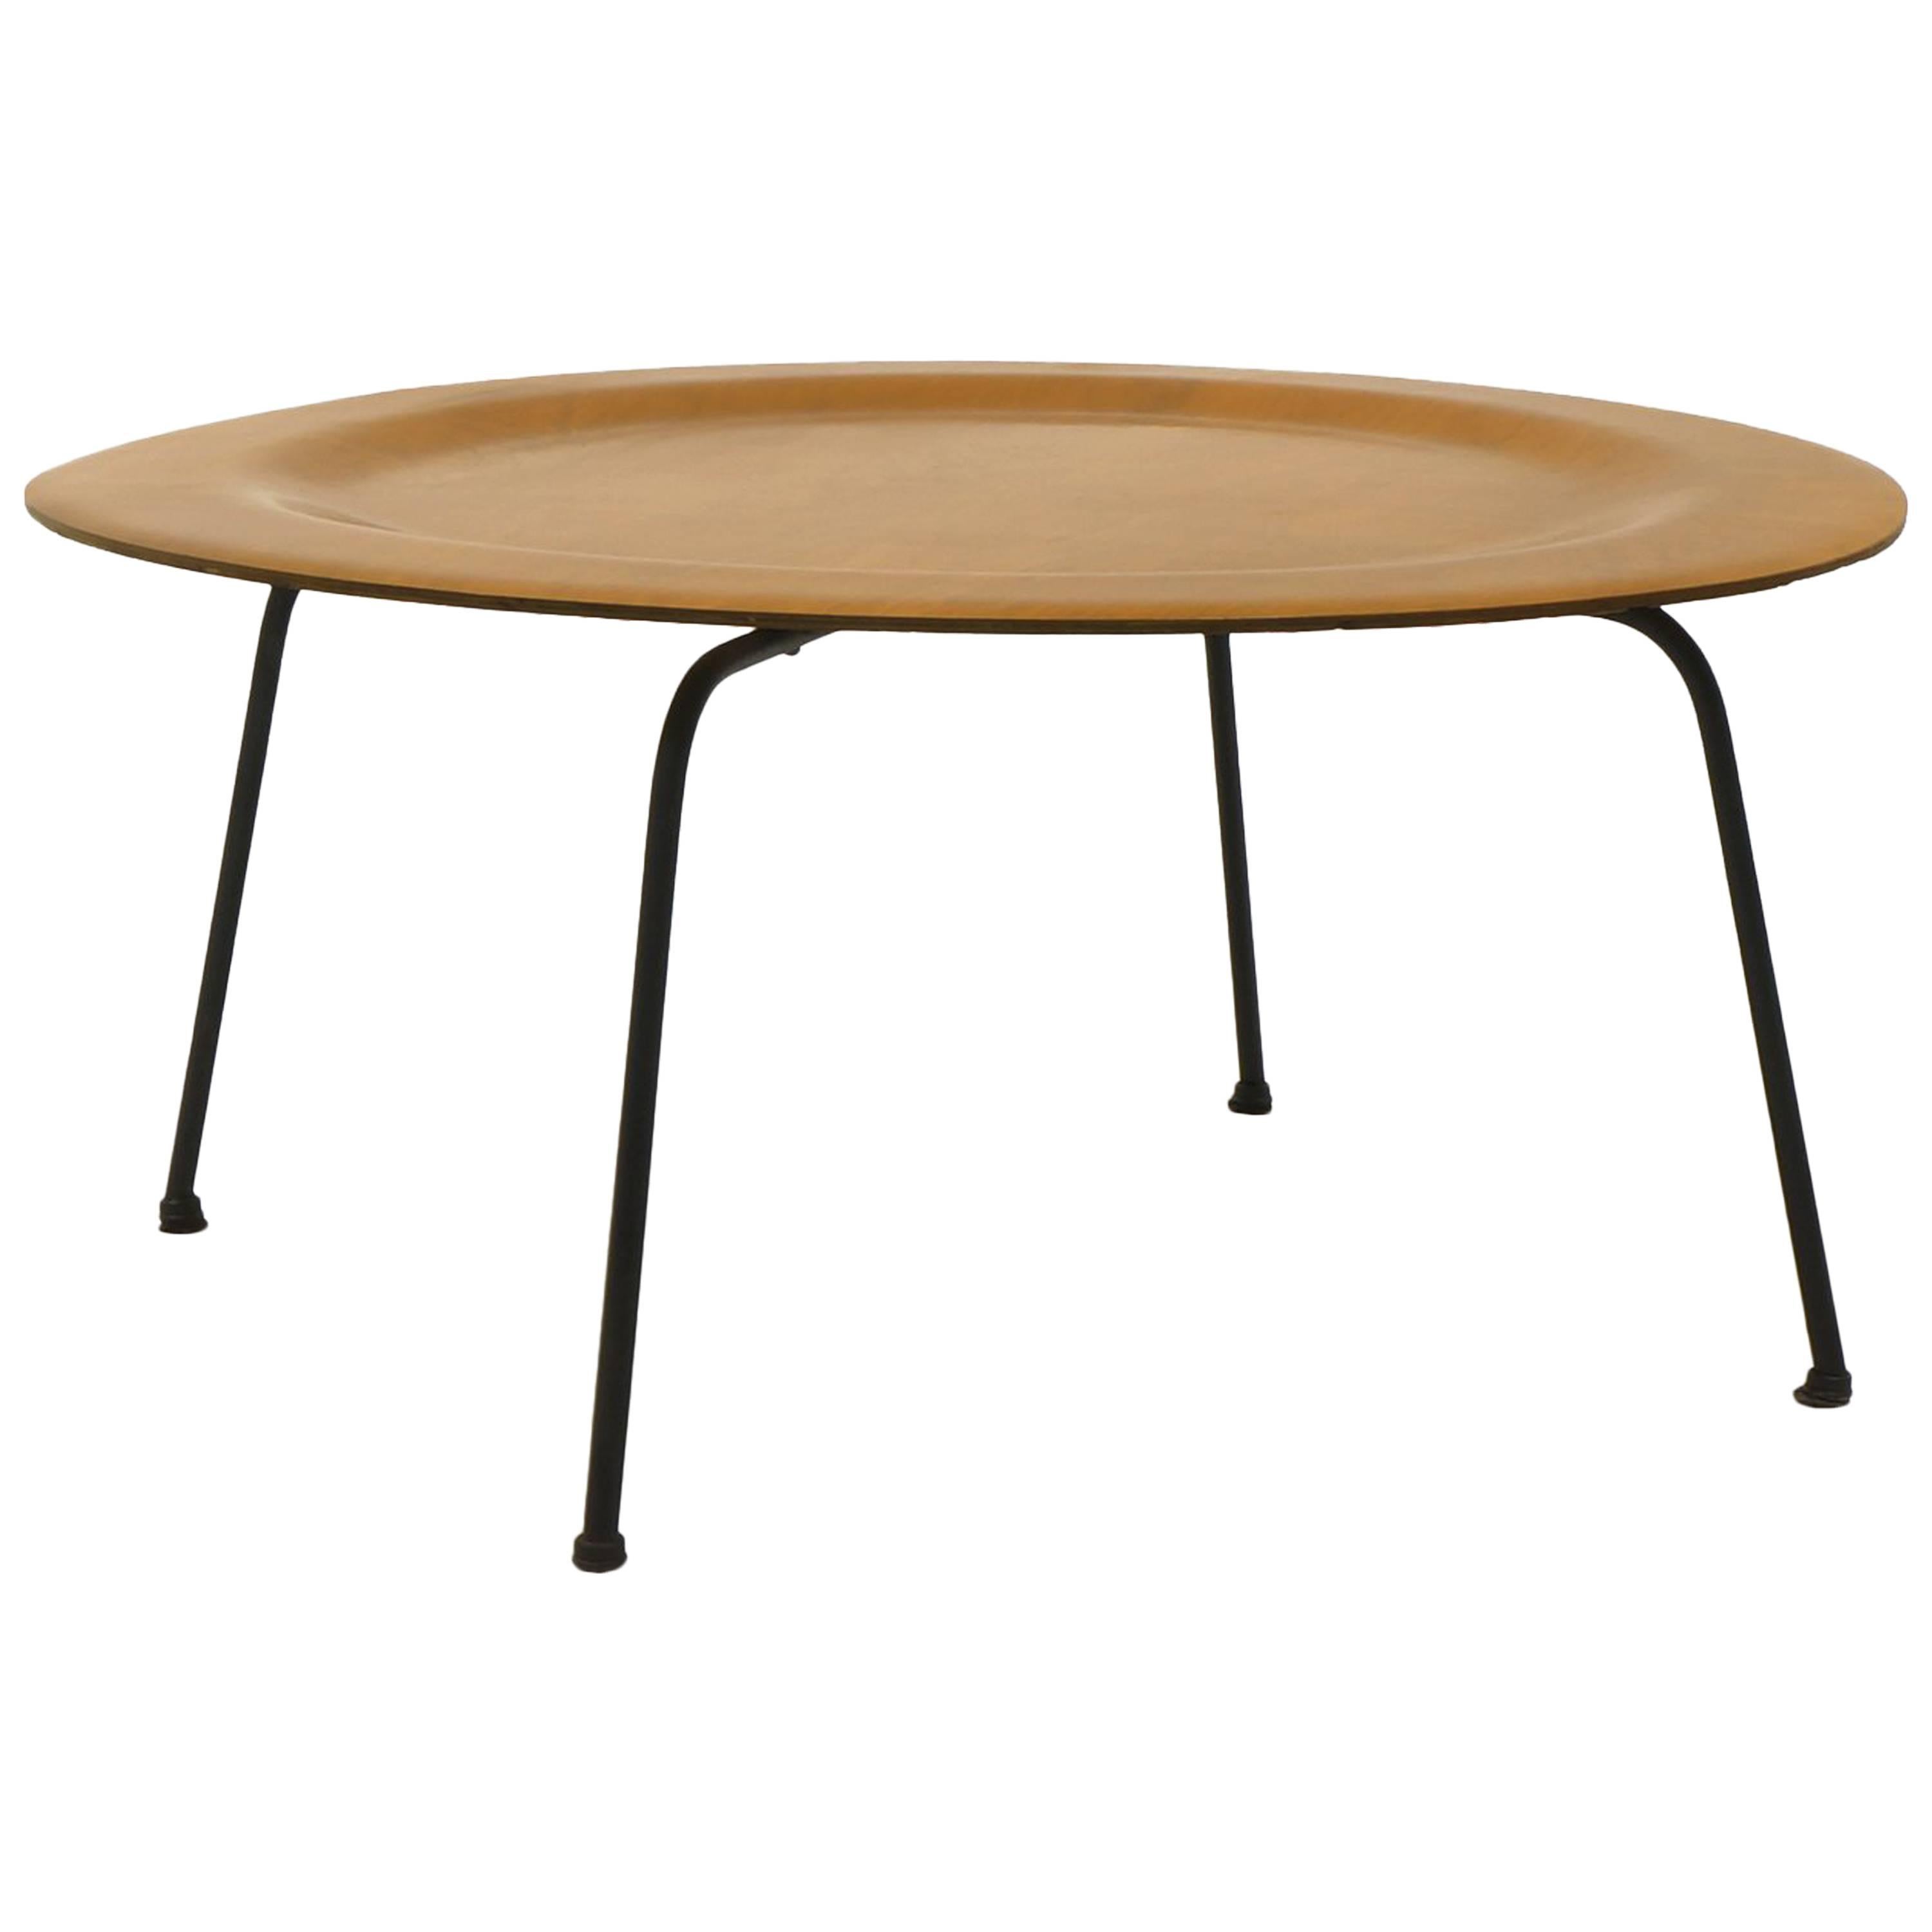 Second Generation Eames CTM Coffee Table Metal Legs, Expertly Restored